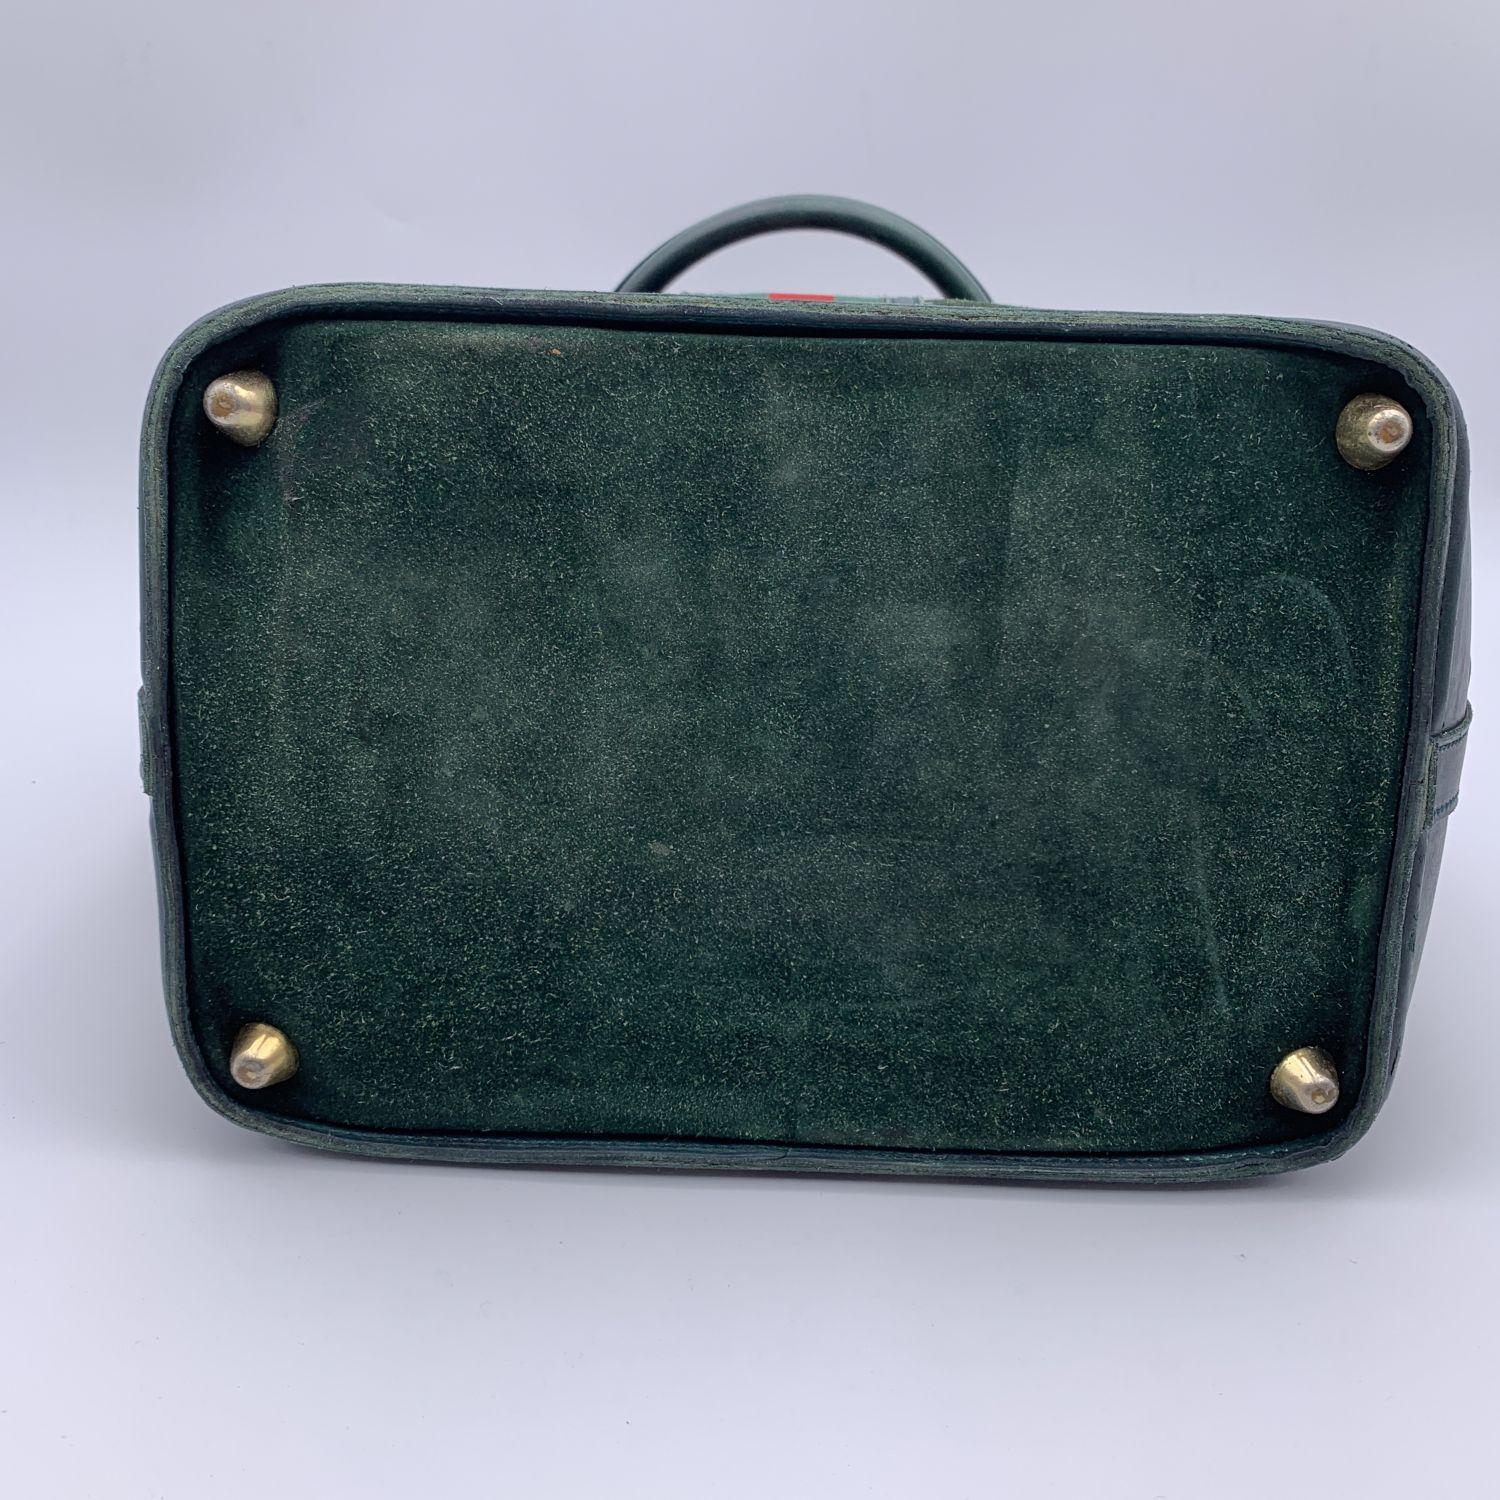 Women's Gucci Vintage Green Suede Leather Travel Bag Train Case with Stripes